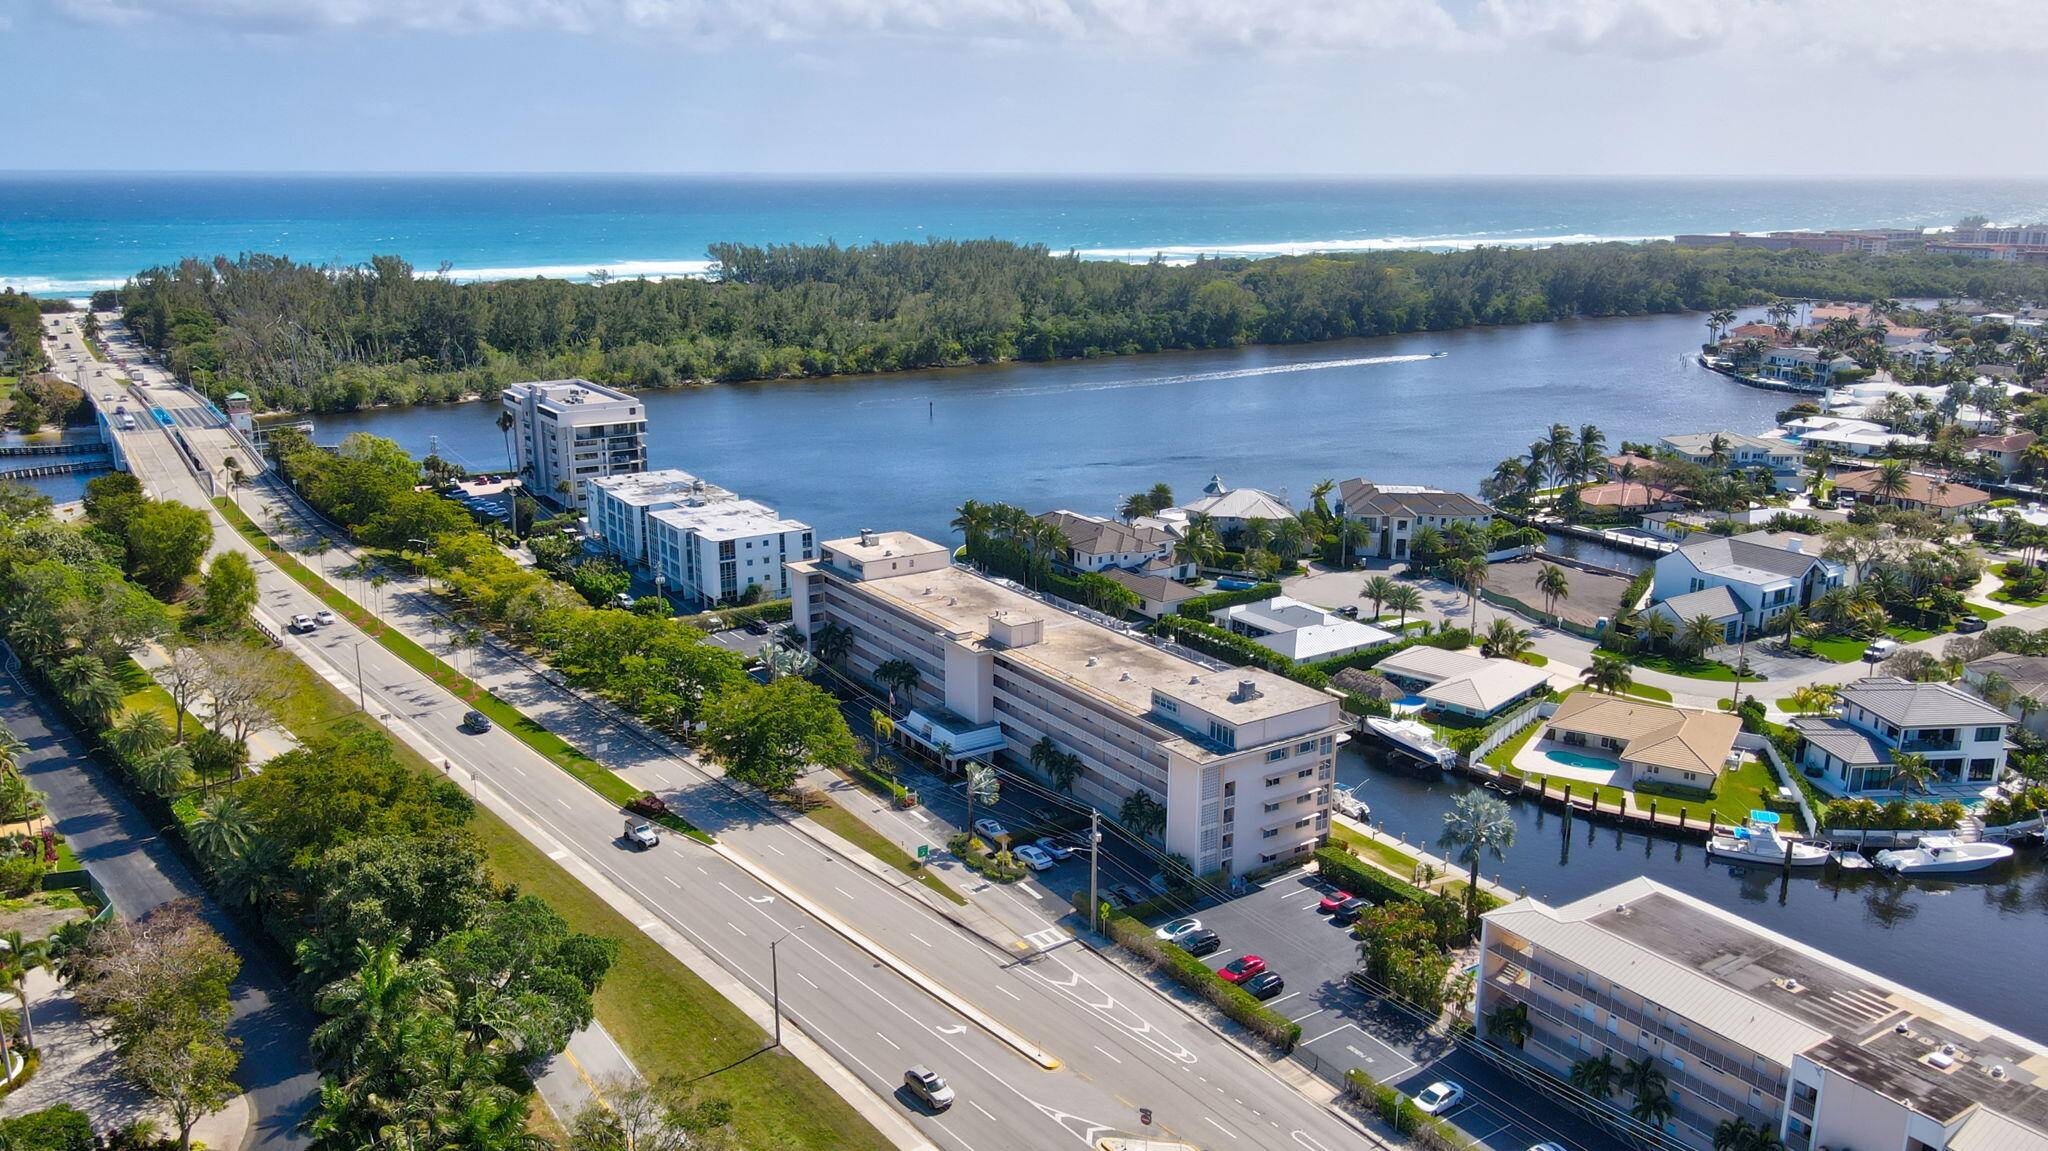 Experience the epitome of coastal living in Boca House's Unit 109, a charming 2 bedroom, 2 bathroom condo offering 1, 056 sq ft of living space.